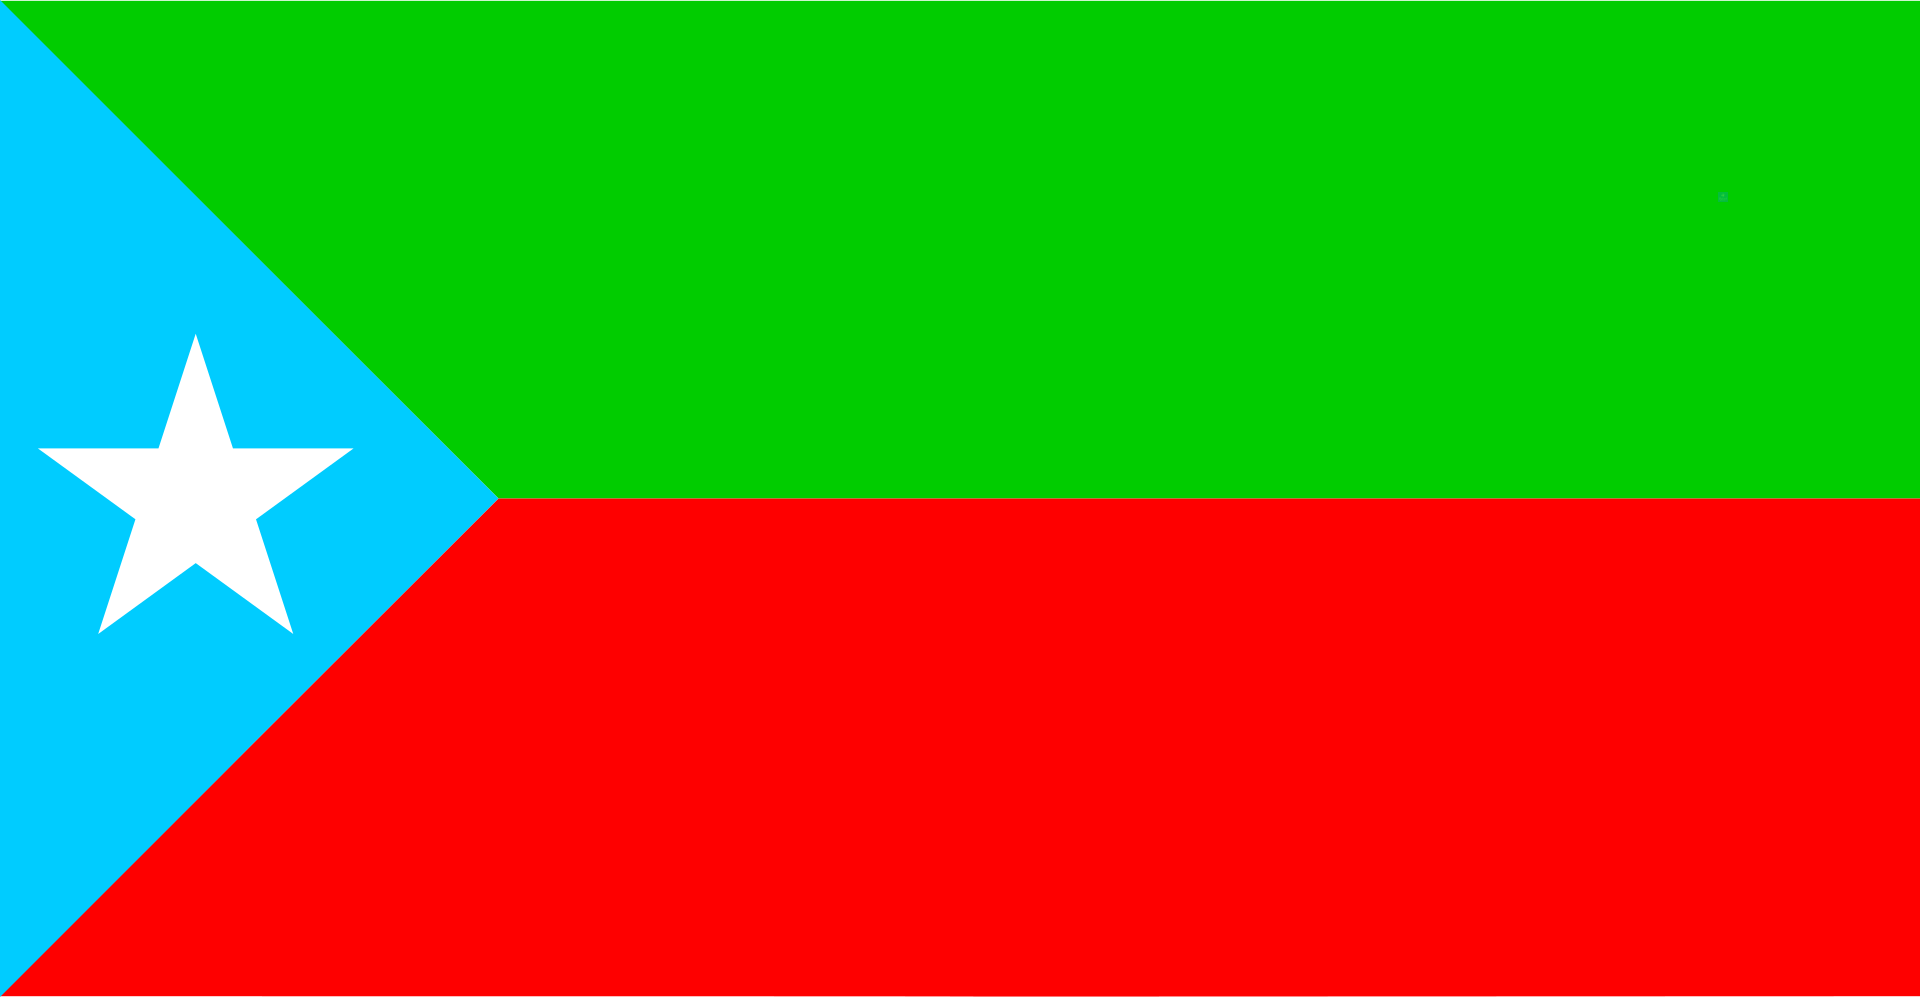 Flag of the independence movement of Balochistan, currently a province of Pakistan. Used by the Baloch Republican Party